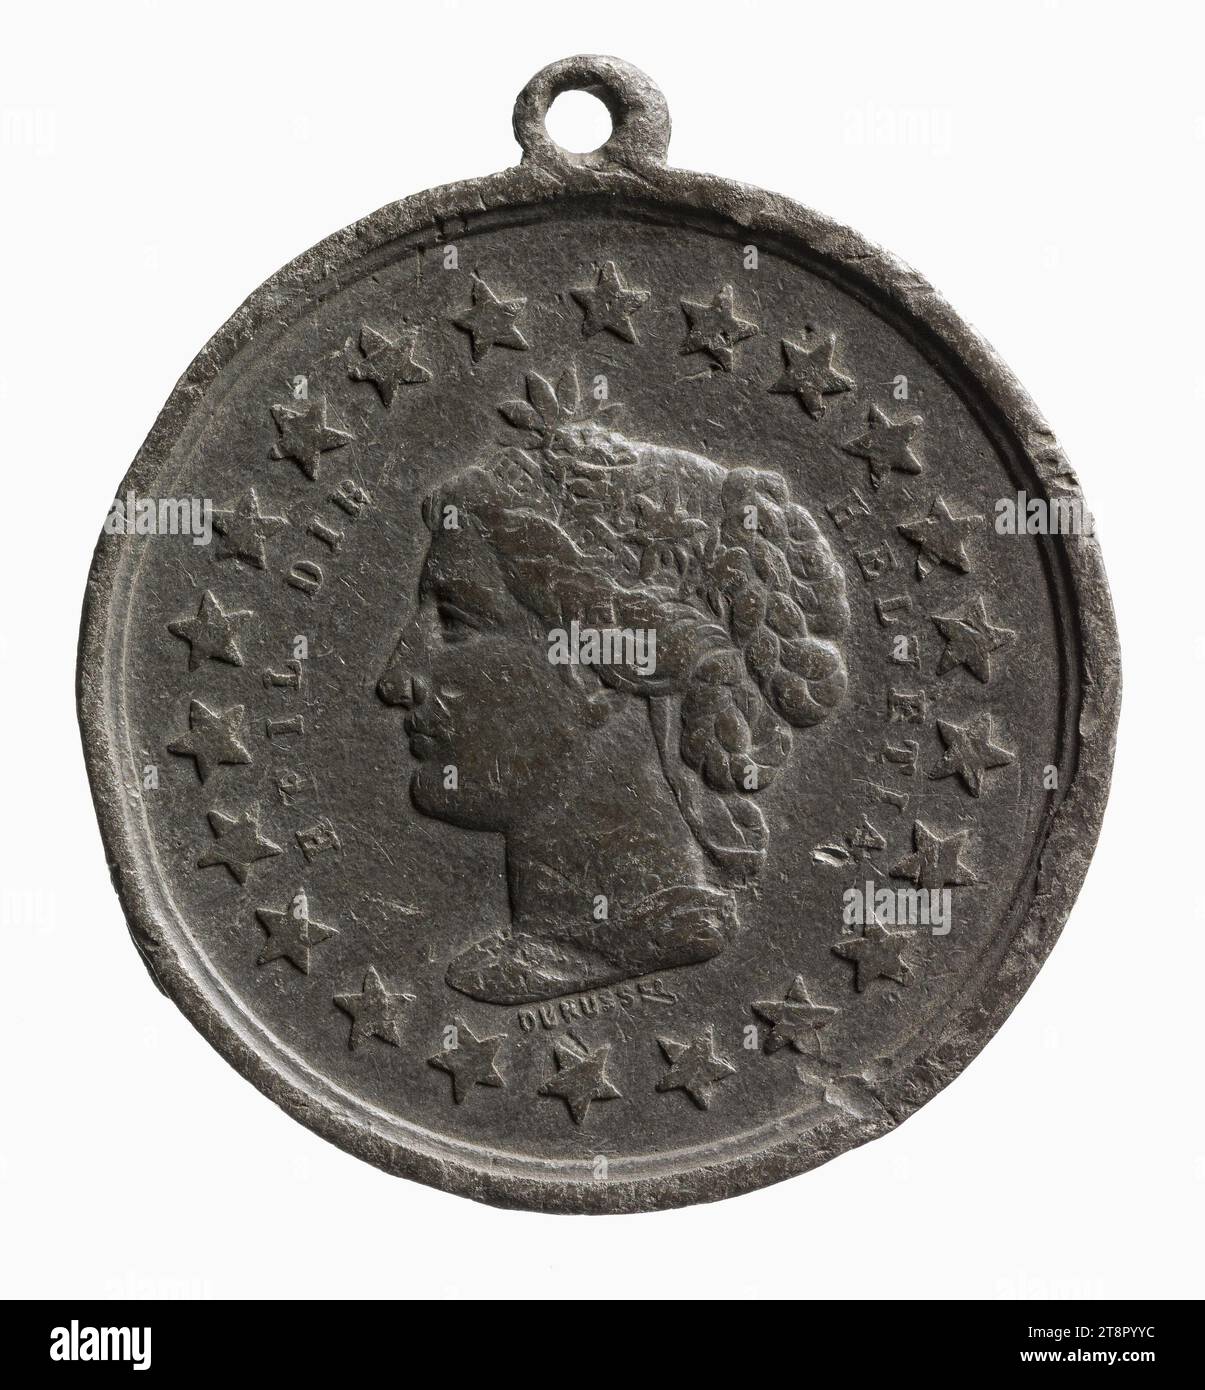 Federal Shooting Festival in Basel, 1879, Durussel, Edouard, Medal Engraver, Array, Numismatic, Medal, Pewter, Dimensions - Work: Diameter: 3.2 cm, Weight (type size): 10.12 g Stock Photo